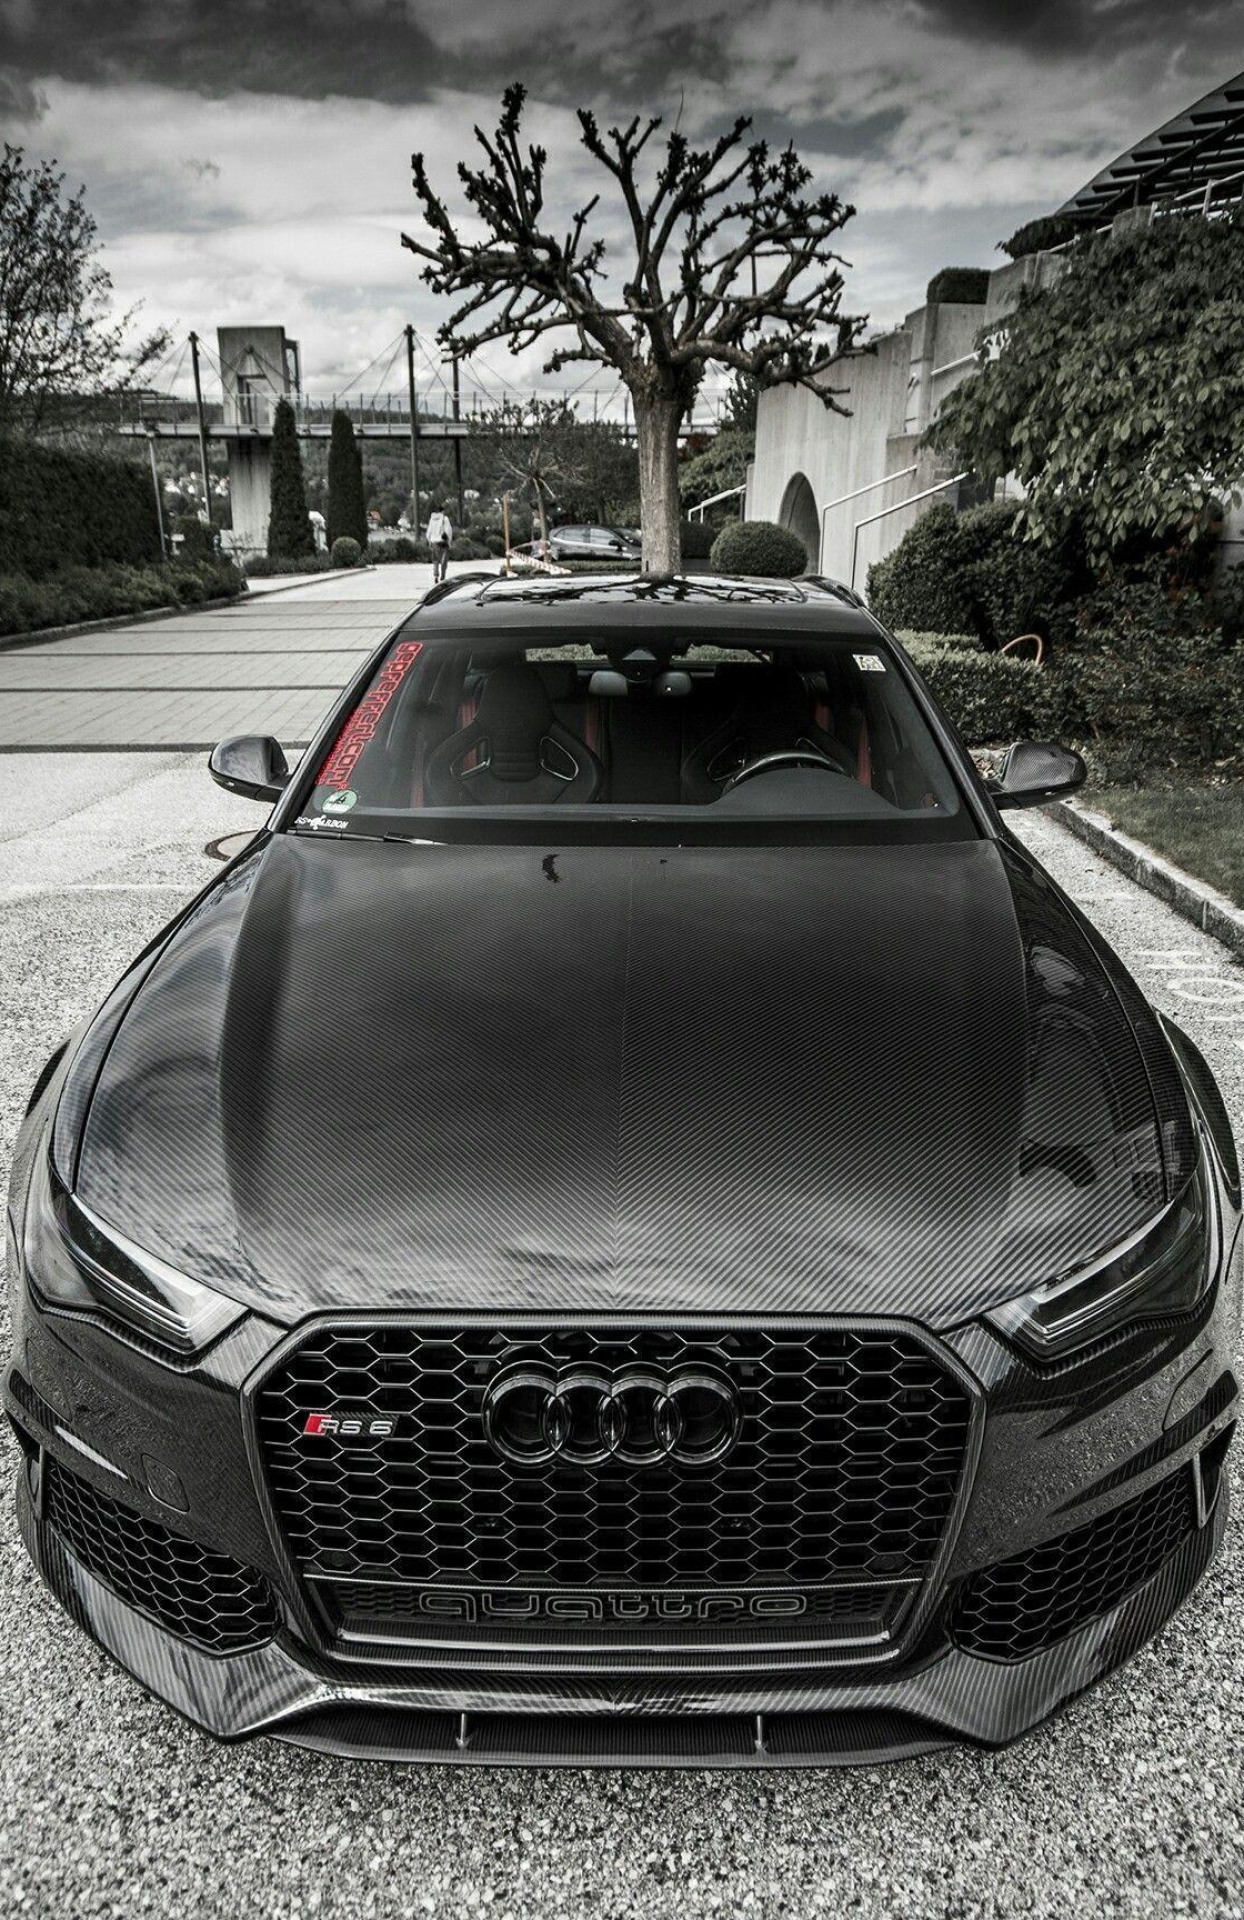 Audi S6, RS6, iPhone wallpapers, Digitally crafted, 1250x1920 HD Handy